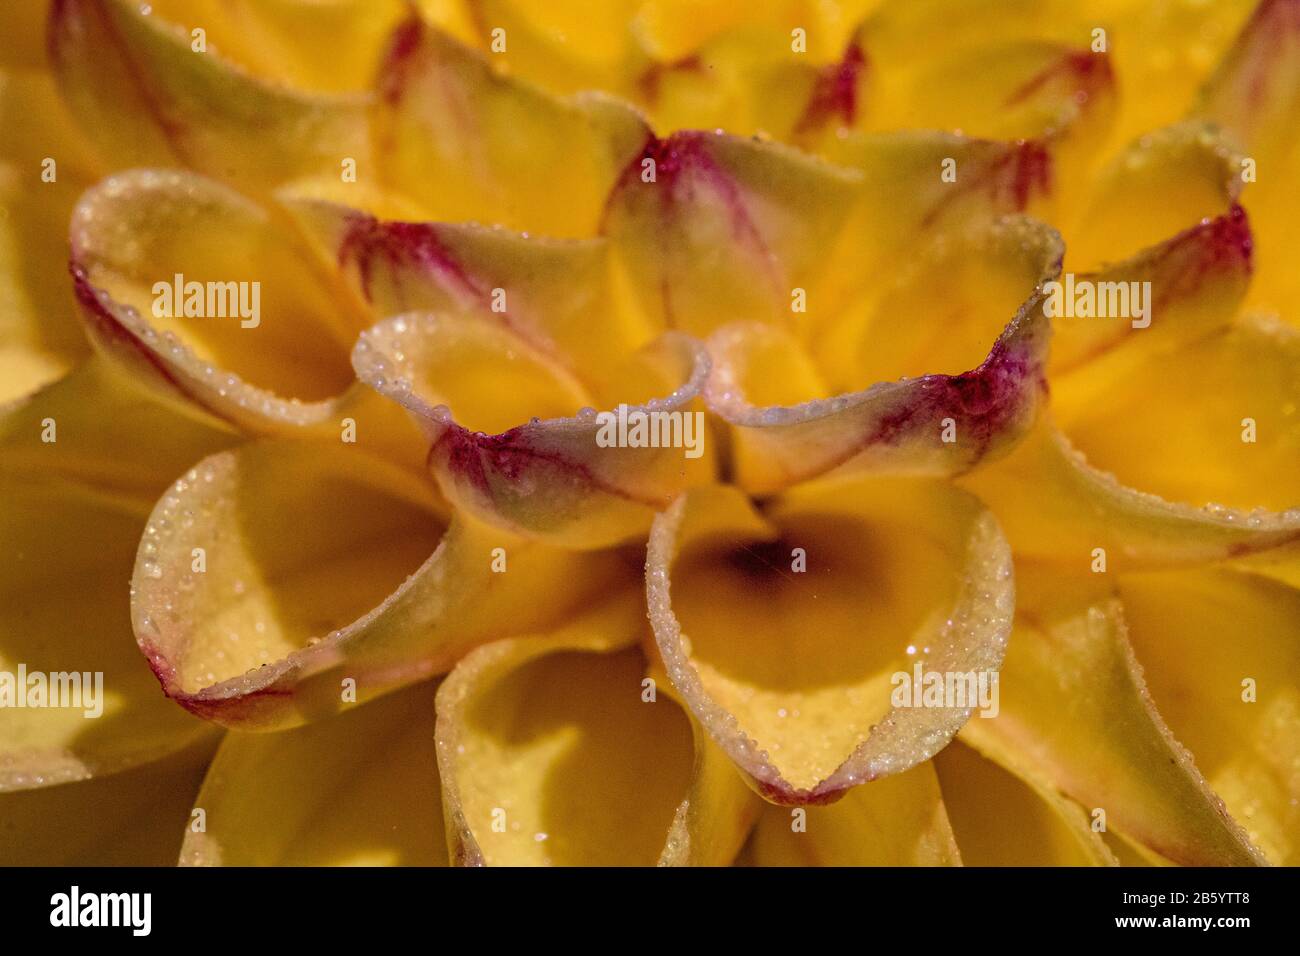 dahlia head yellow and red with water drops Stock Photo